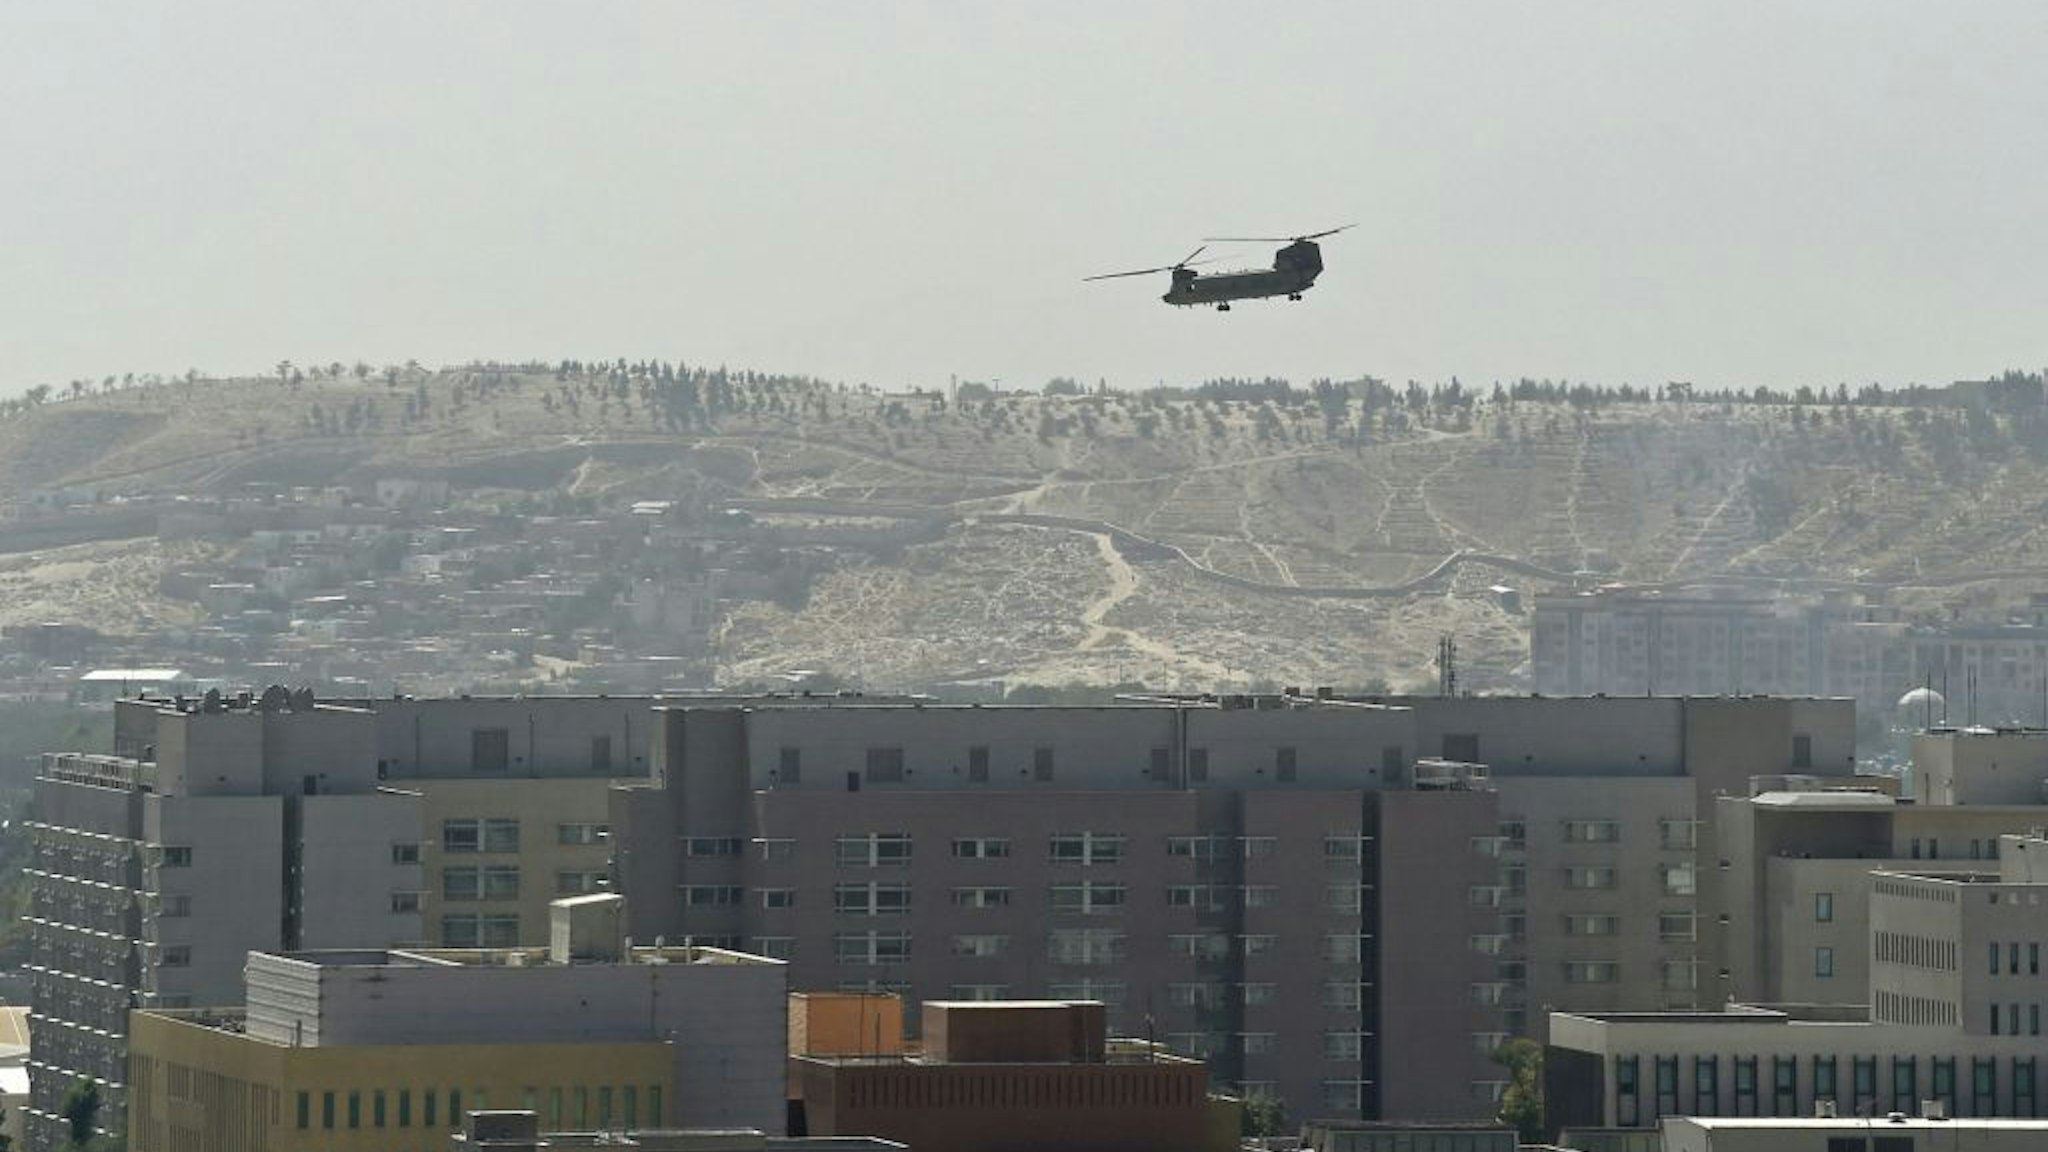 TOPSHOT - A US military helicopter is pictured flying above the US embassy in Kabul on August 15, 2021. (Photo by Wakil KOHSAR / AFP) (Photo by WAKIL KOHSAR/AFP via Getty Images)